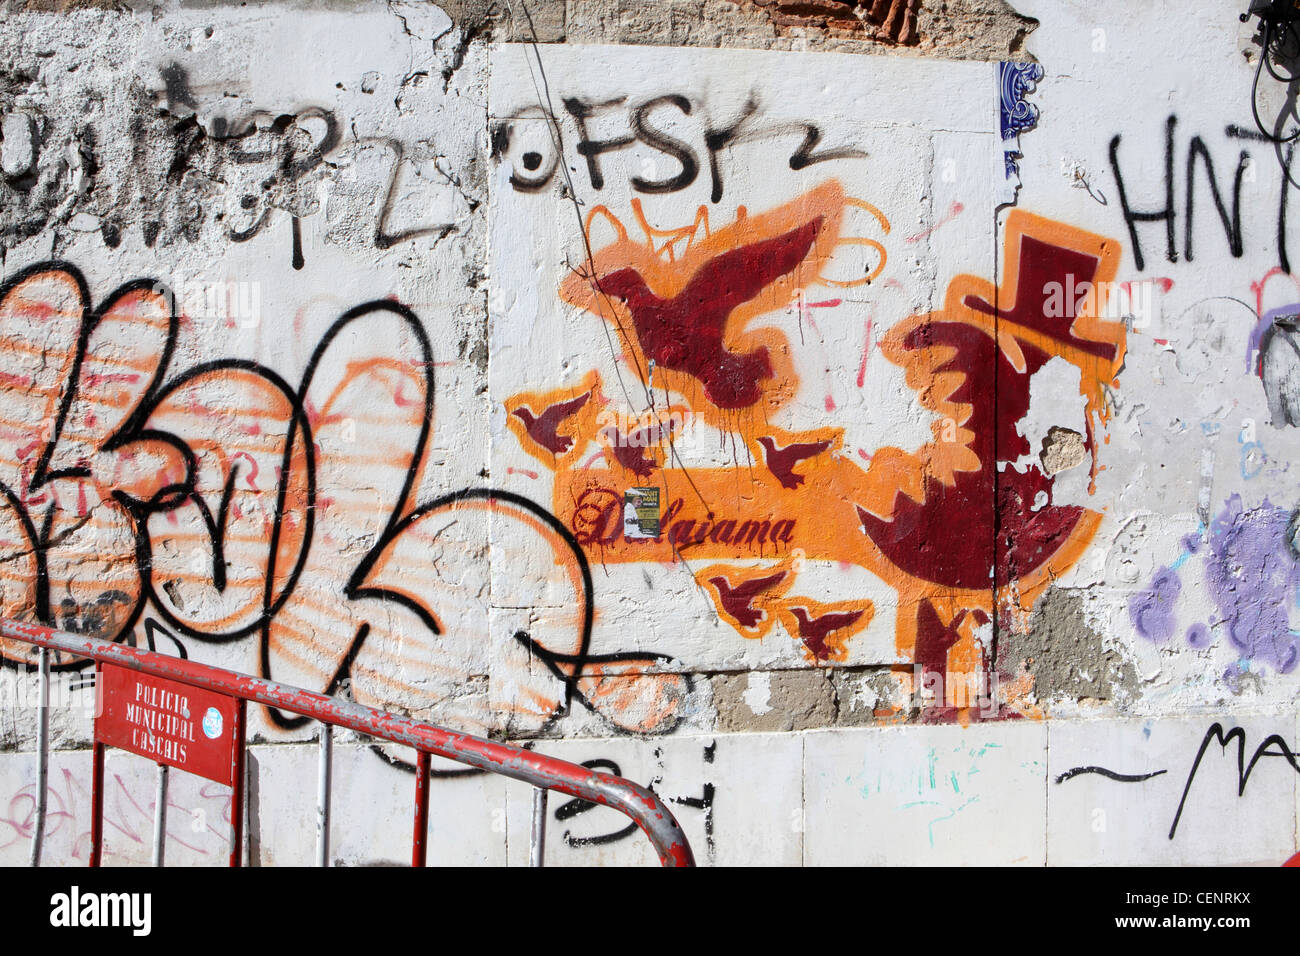 Graffiti on old wall, in central Lisbon, Portugal Stock Photo